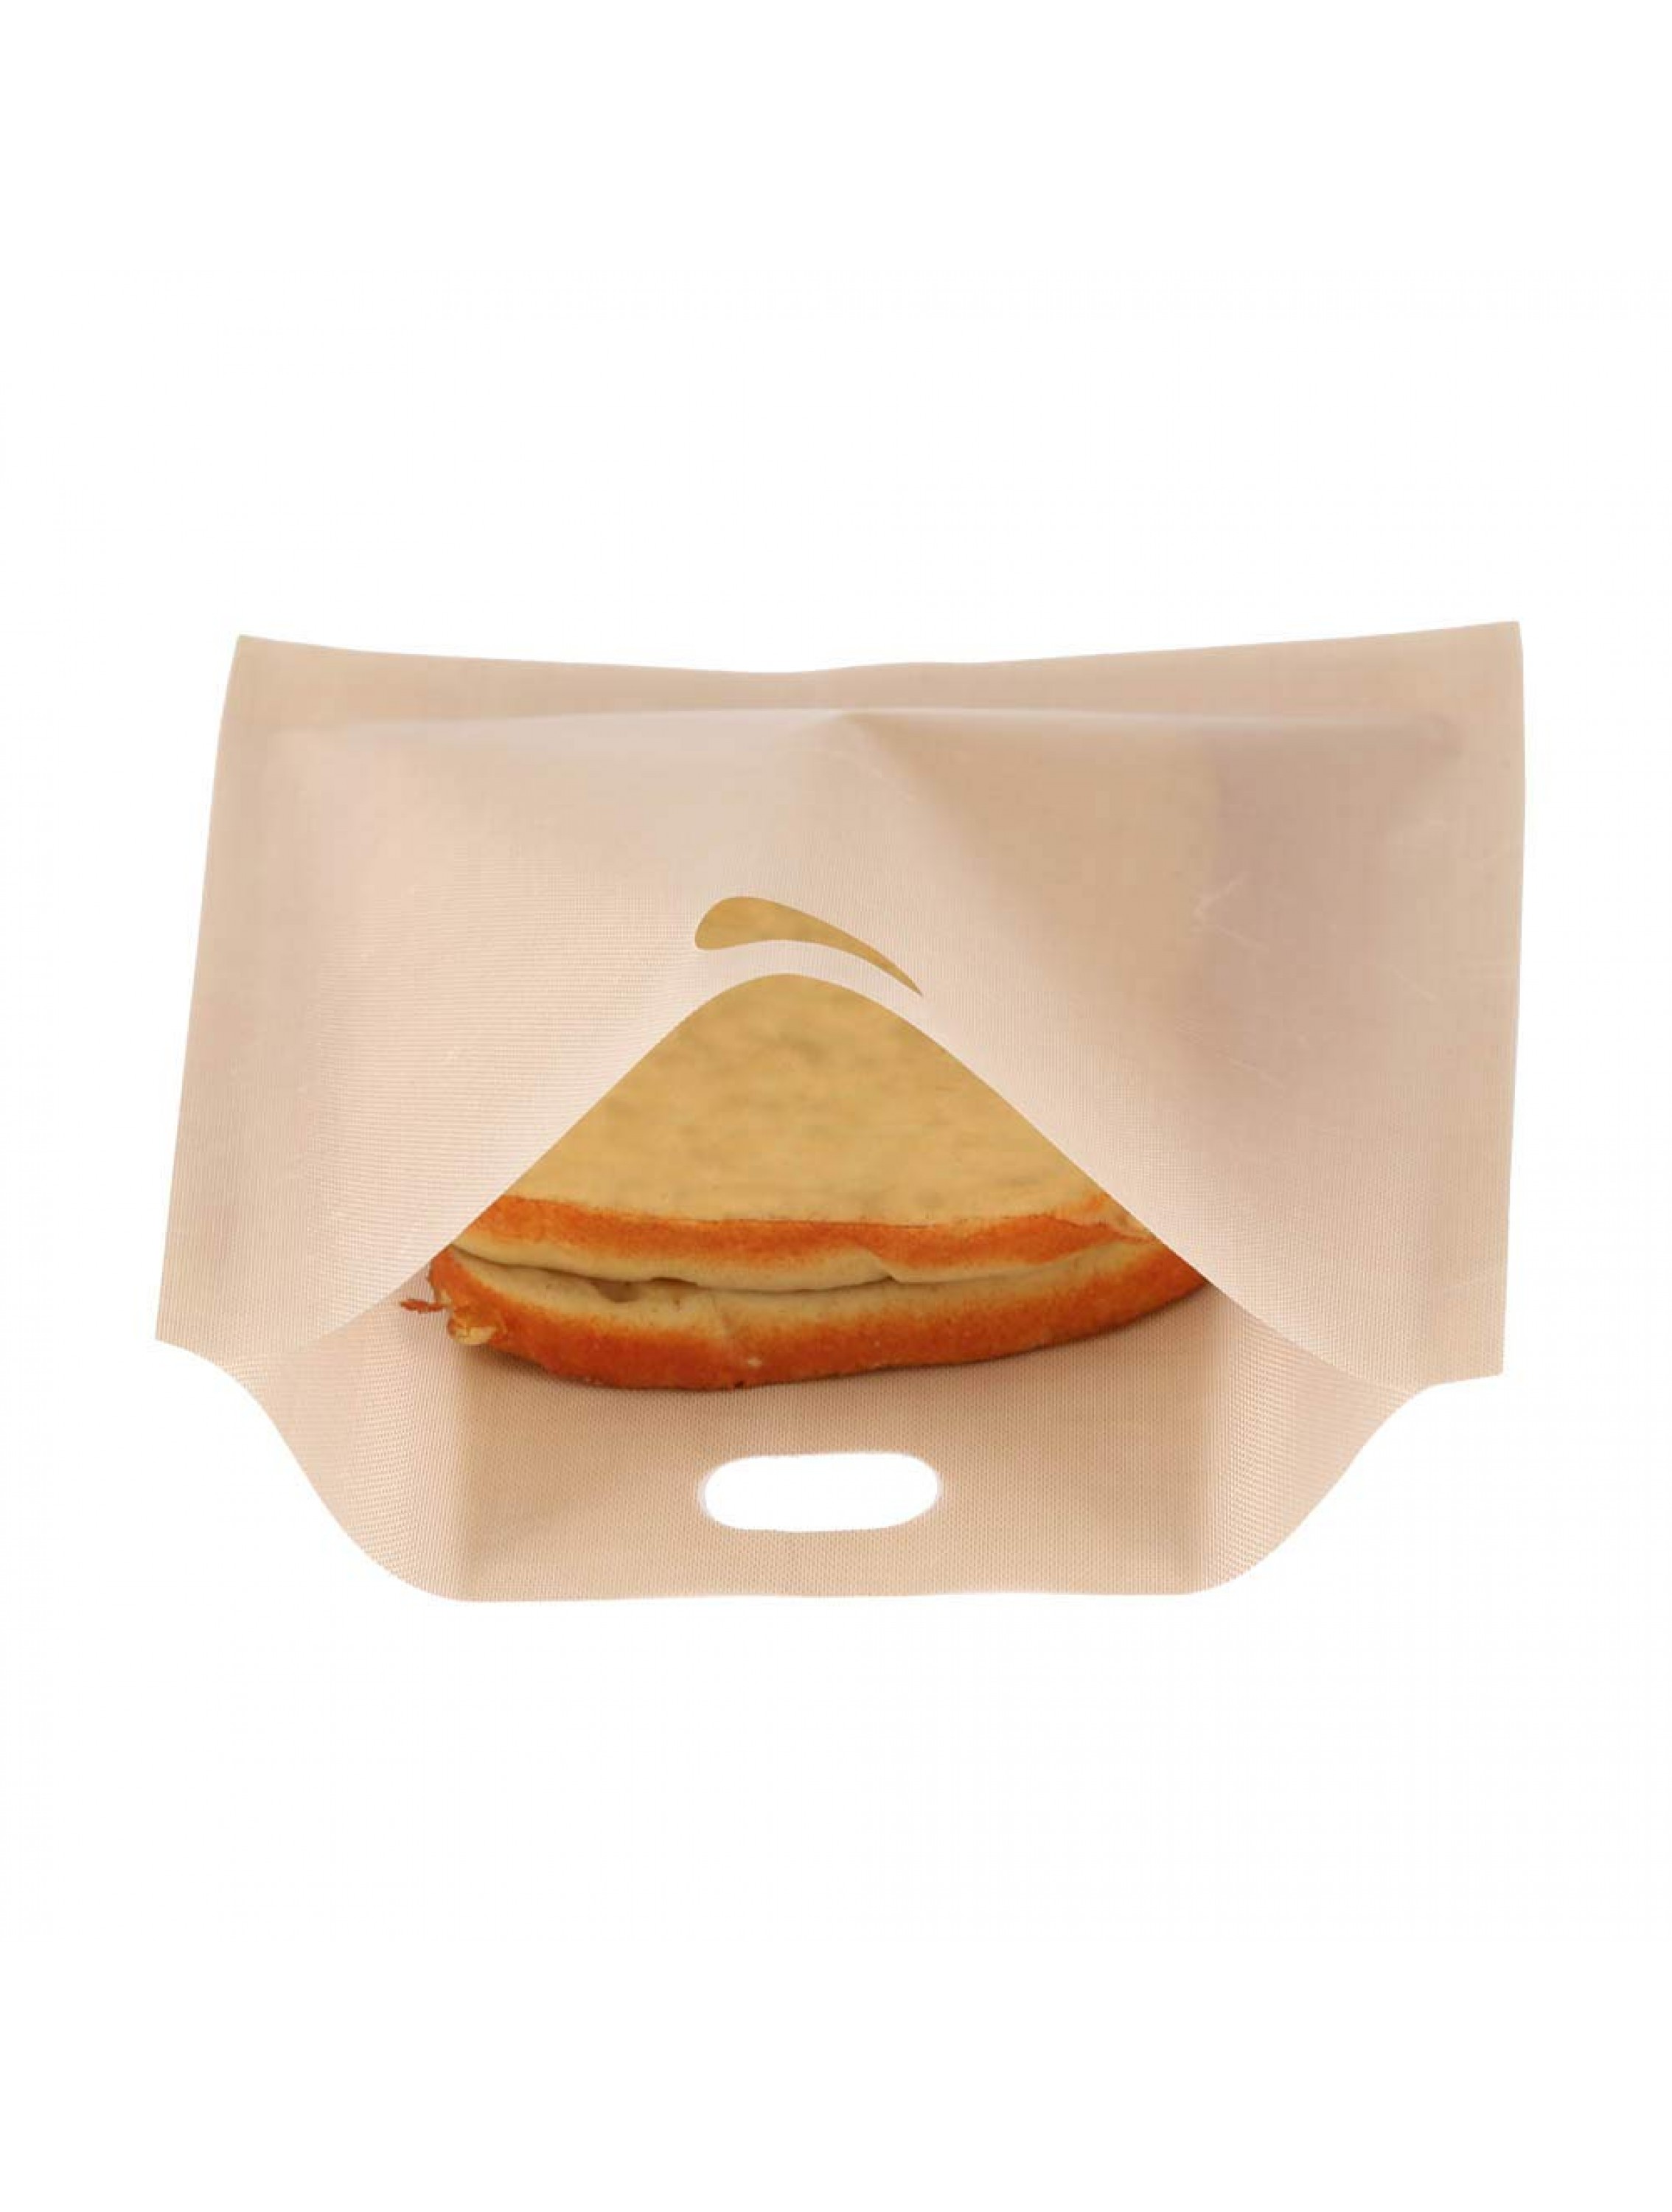 Barbecue Bag,Safe Non Stick Reusable High Temperature Coated Fiberglass Microwave Heating Pastry Toaster Bread Bags #2 - B749KKI0F